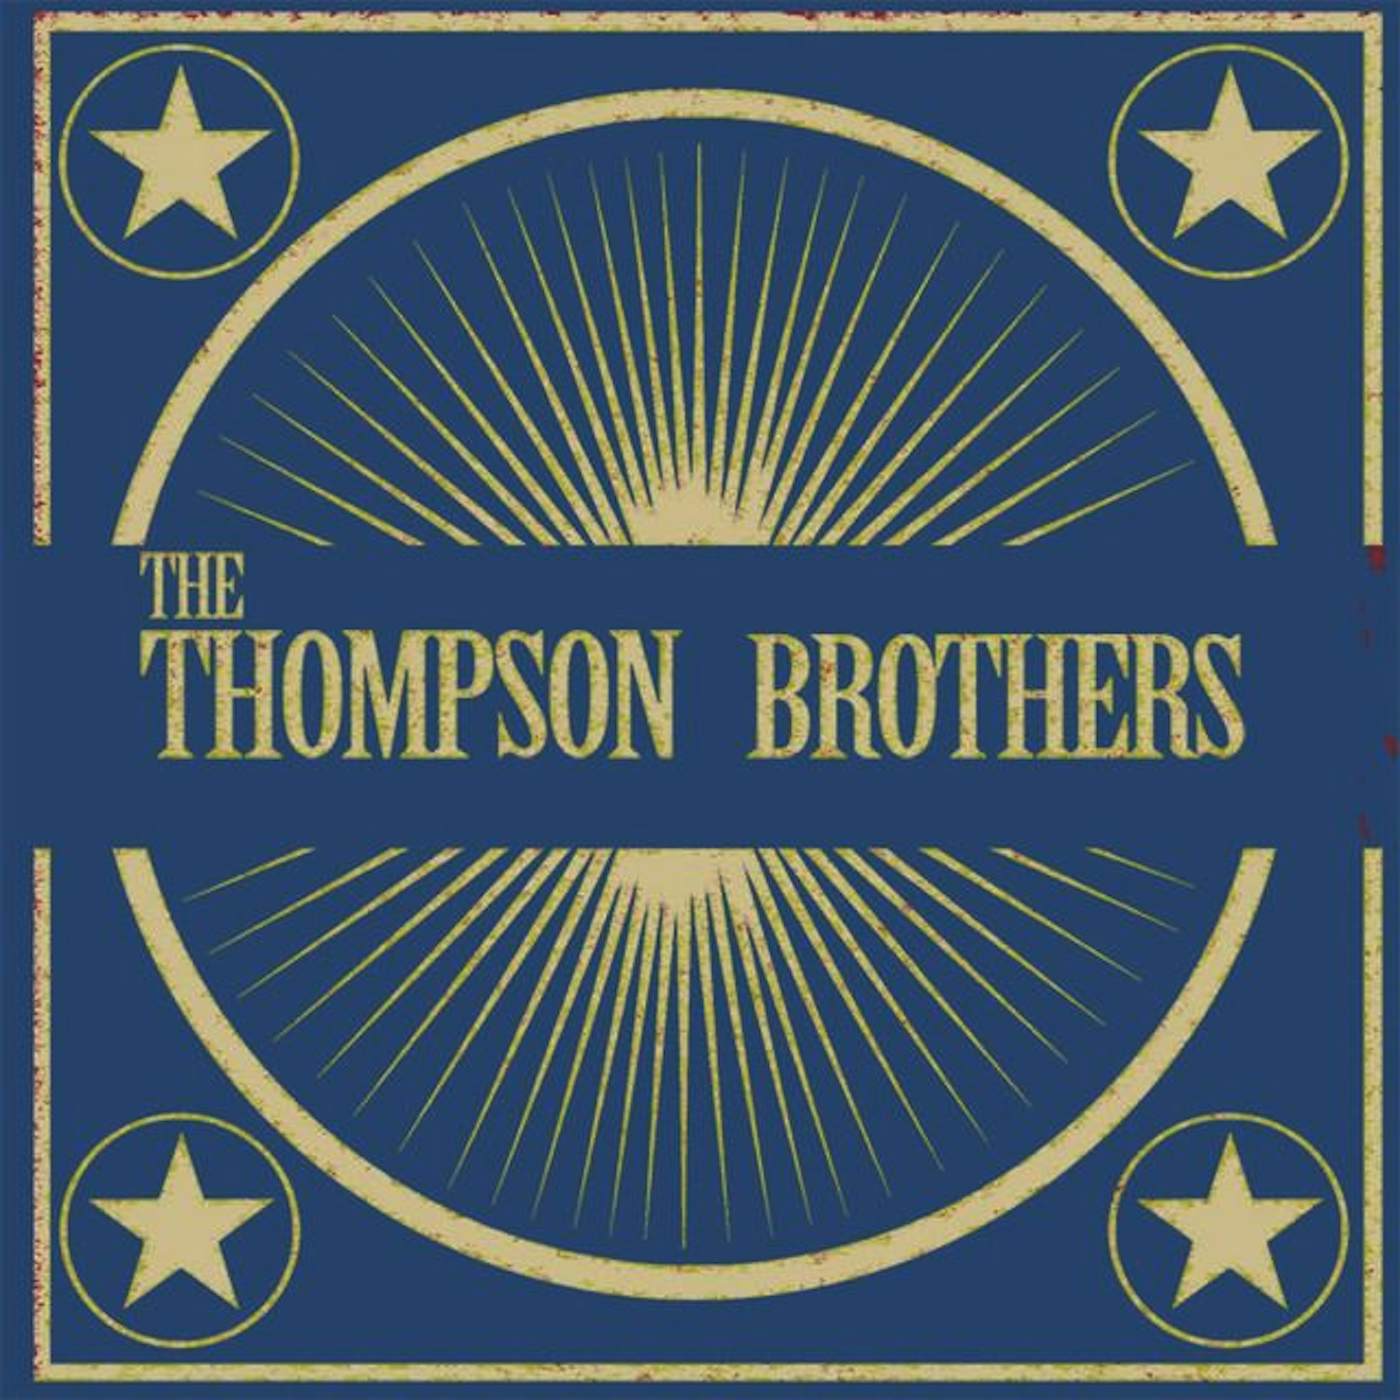 The Thompson Brothers